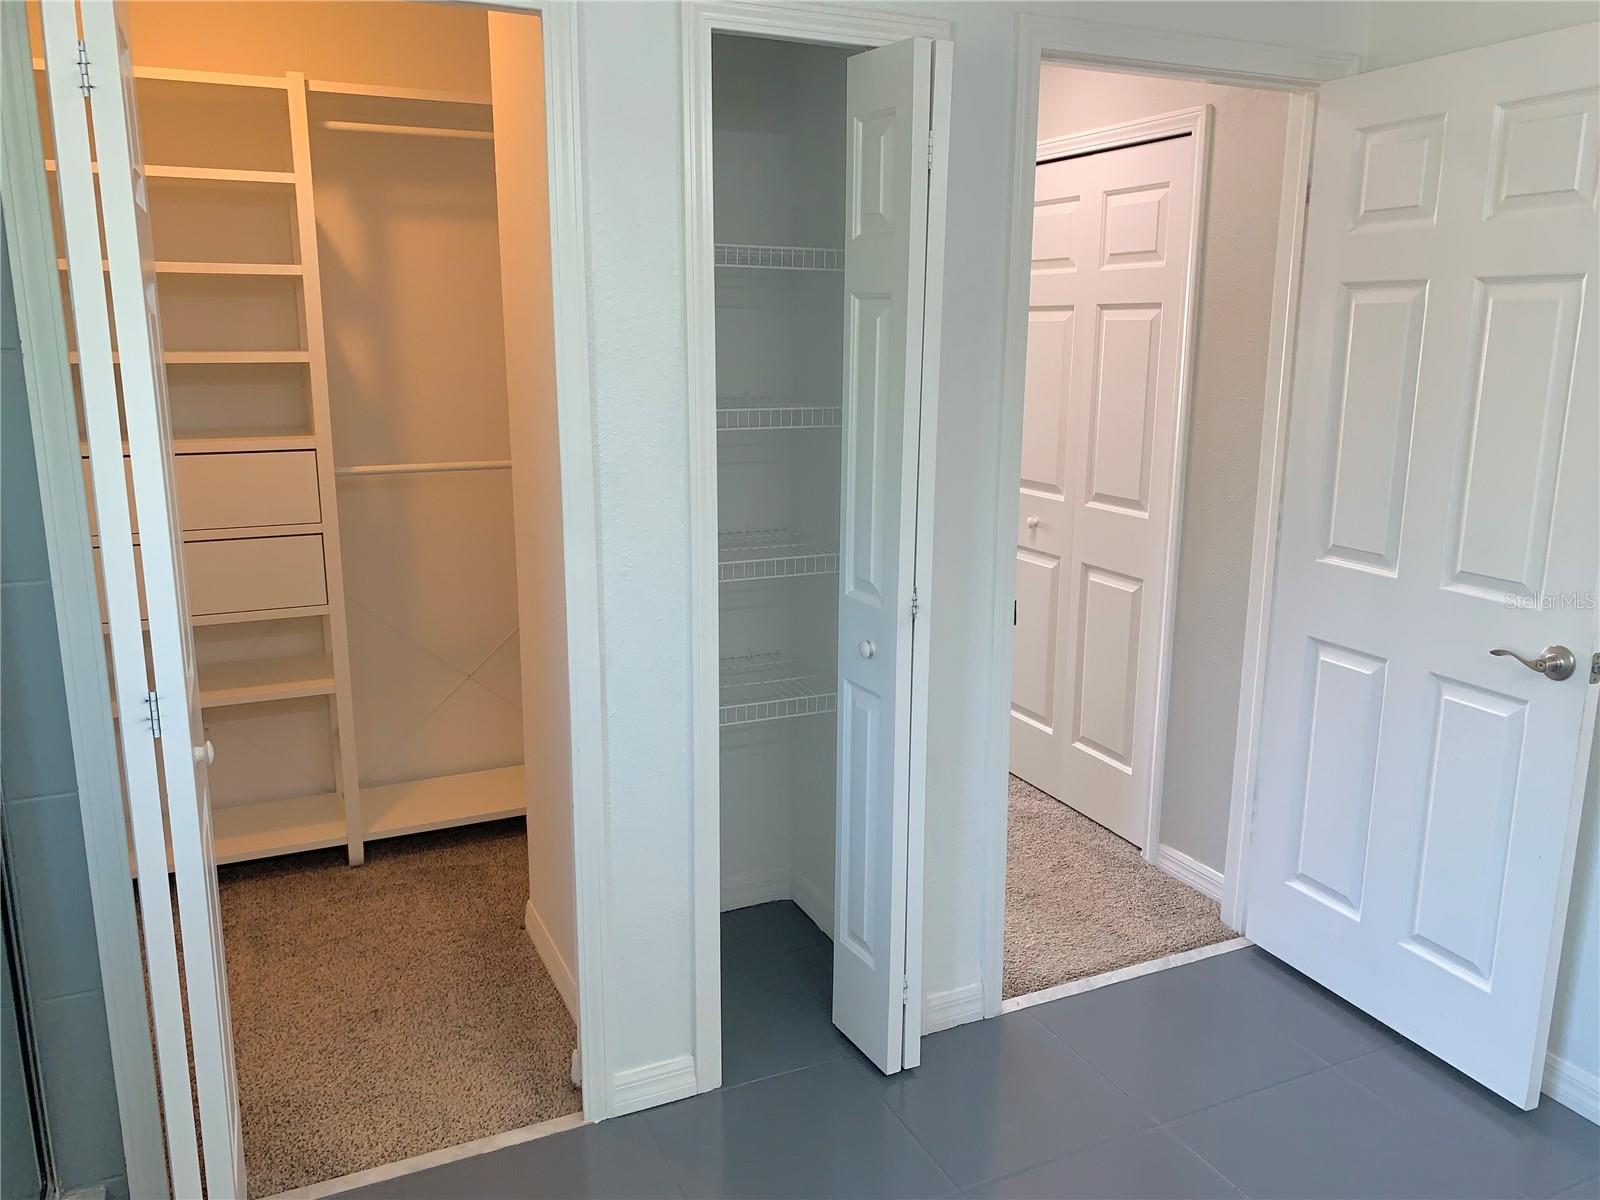 One of two primary closet